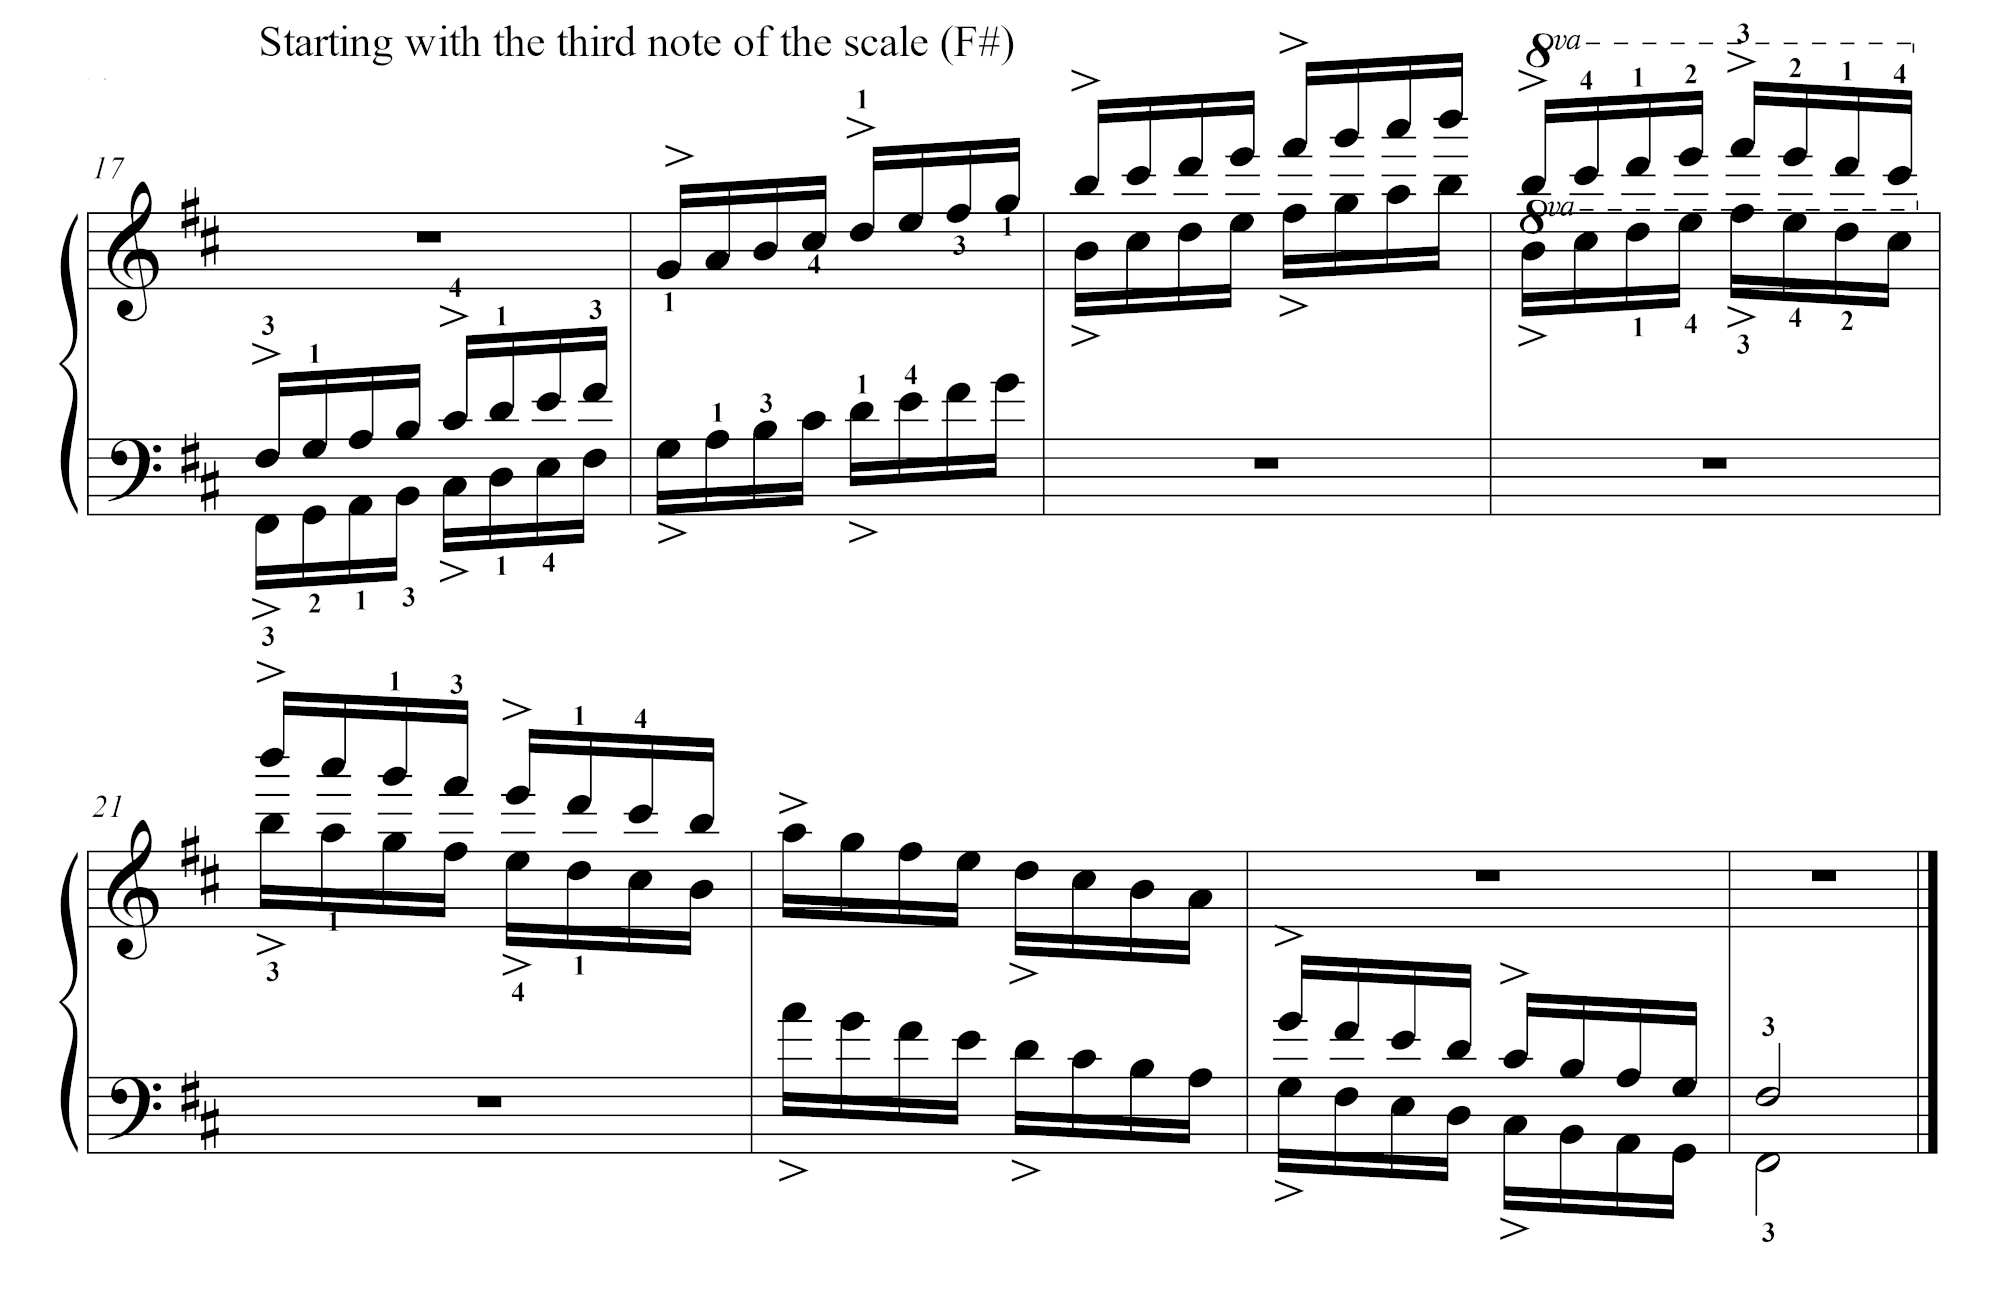 D major piano scale - advanced exercise starting from each consecutive note F sharp